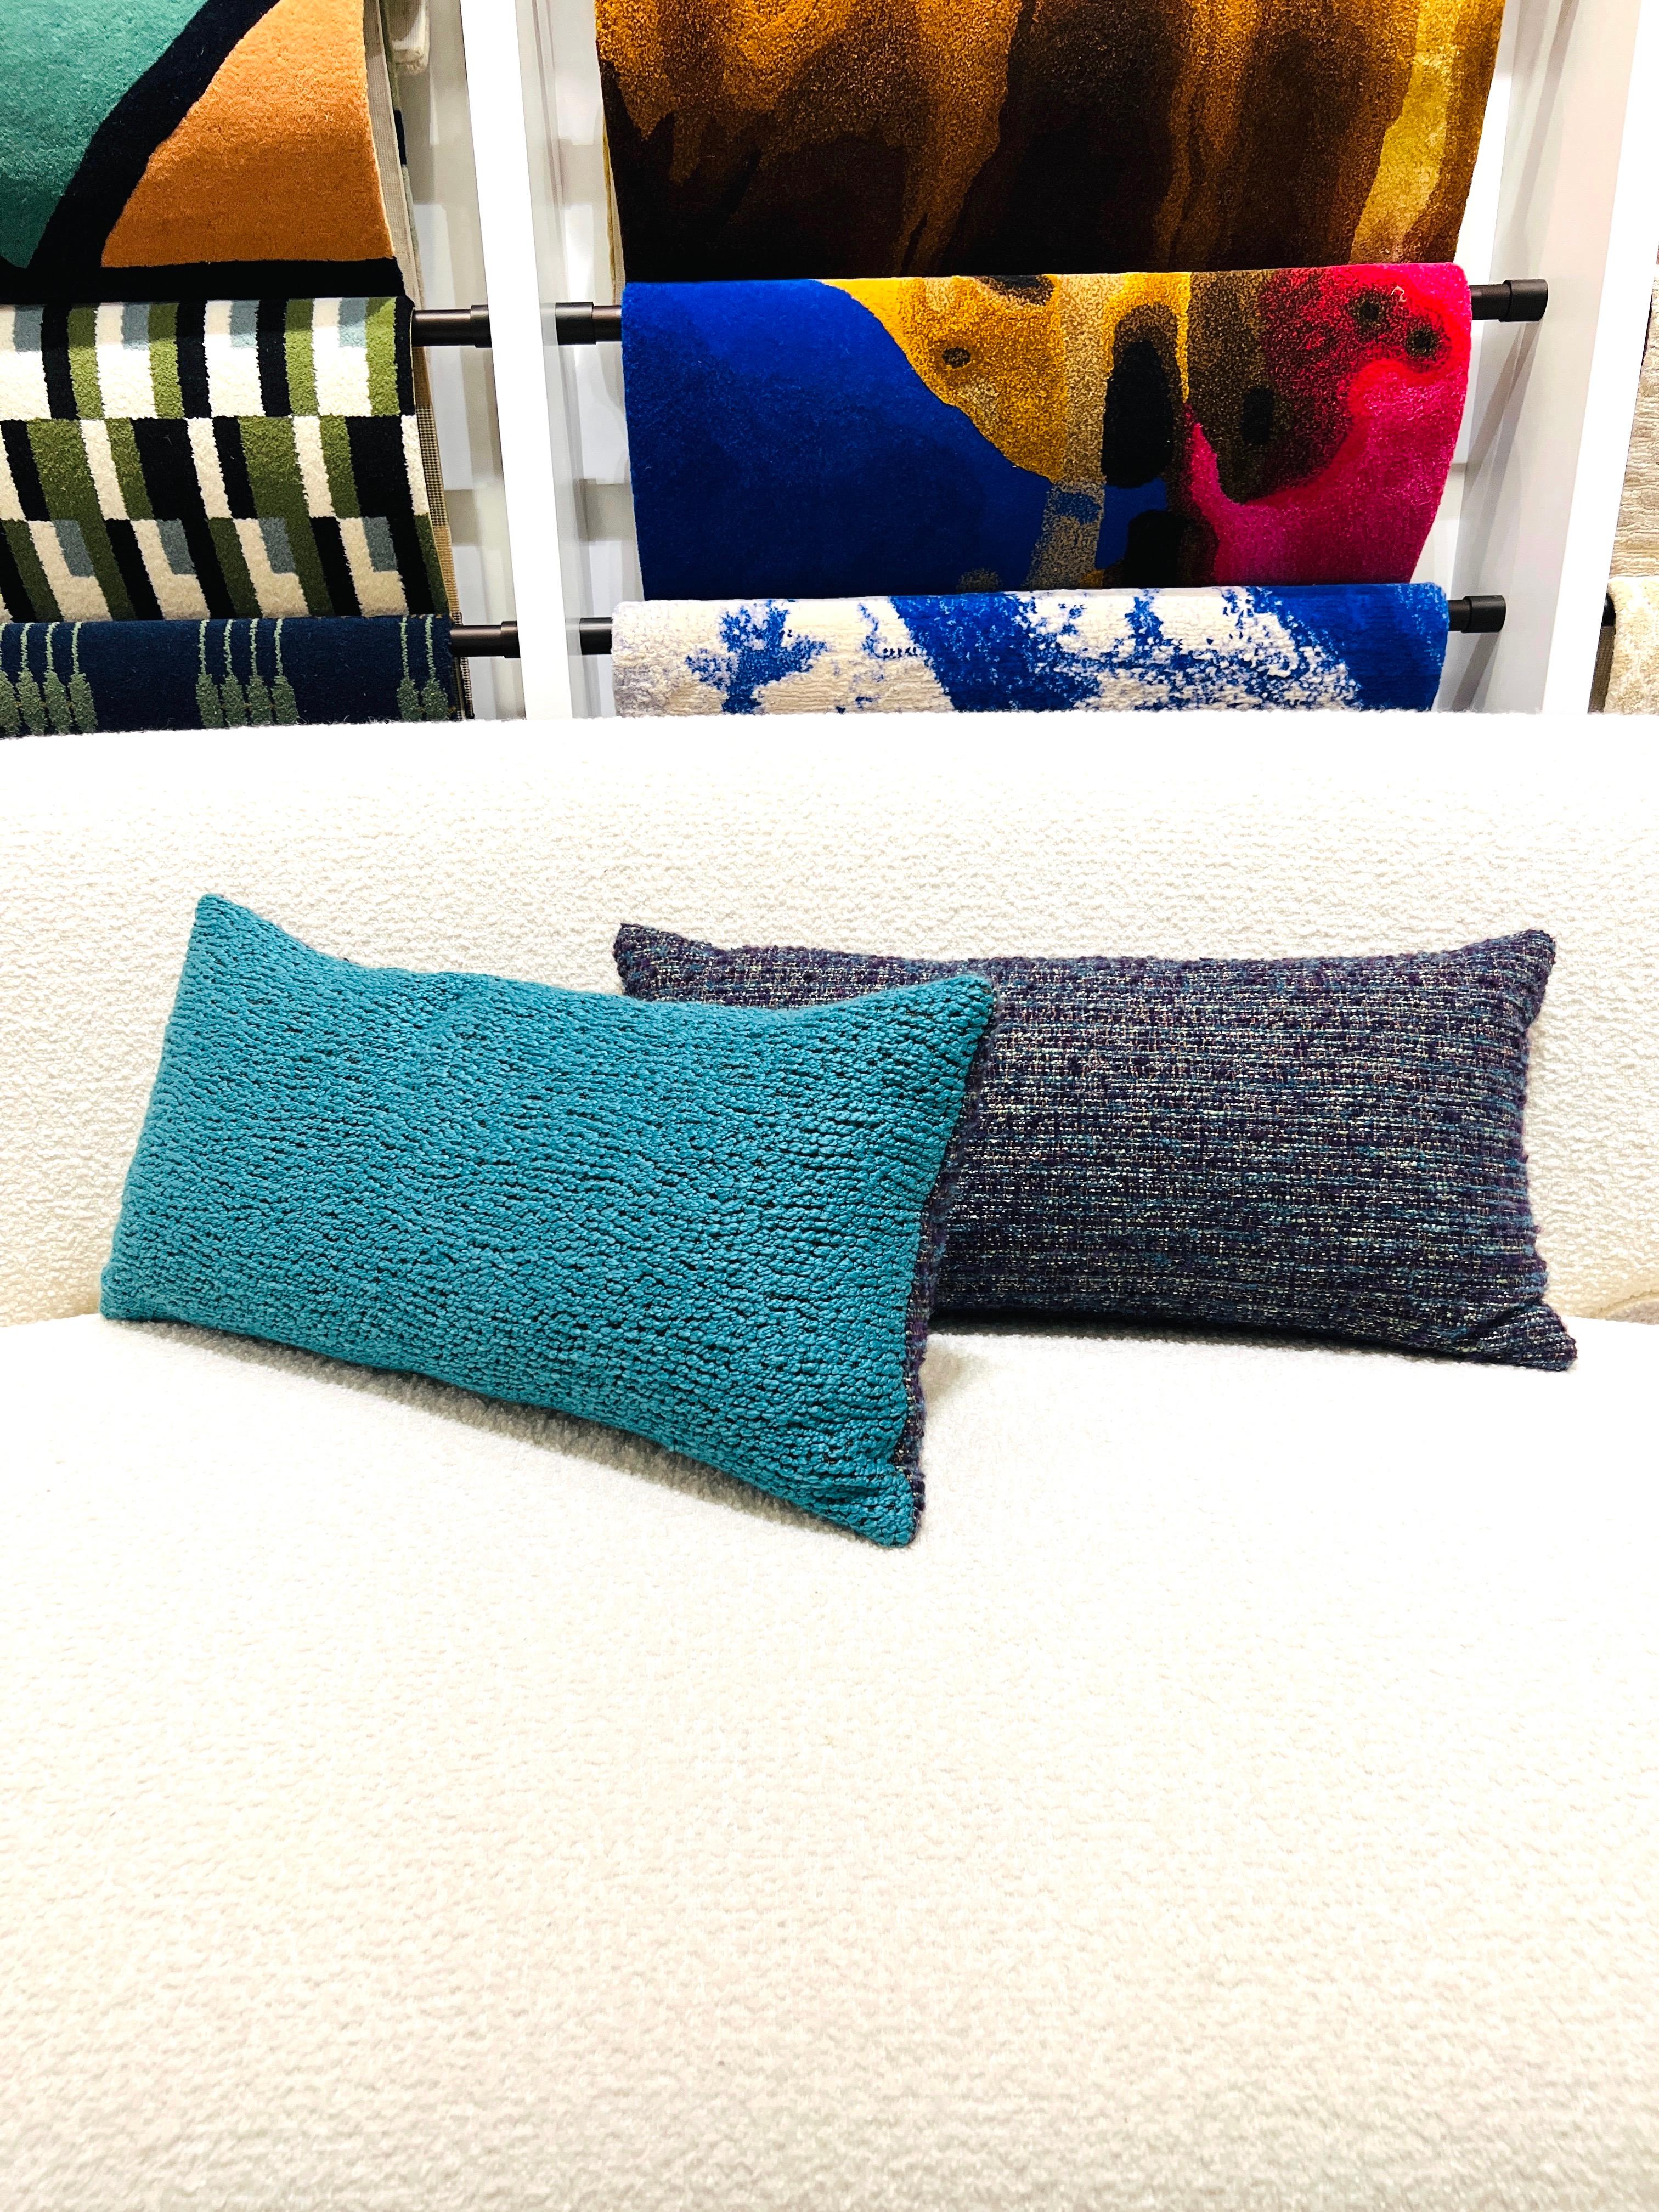 Pierre Frey Woven Textured and Boucle Lumbar Pillows in Purple and Aqua In New Condition For Sale In Fort Lauderdale, FL